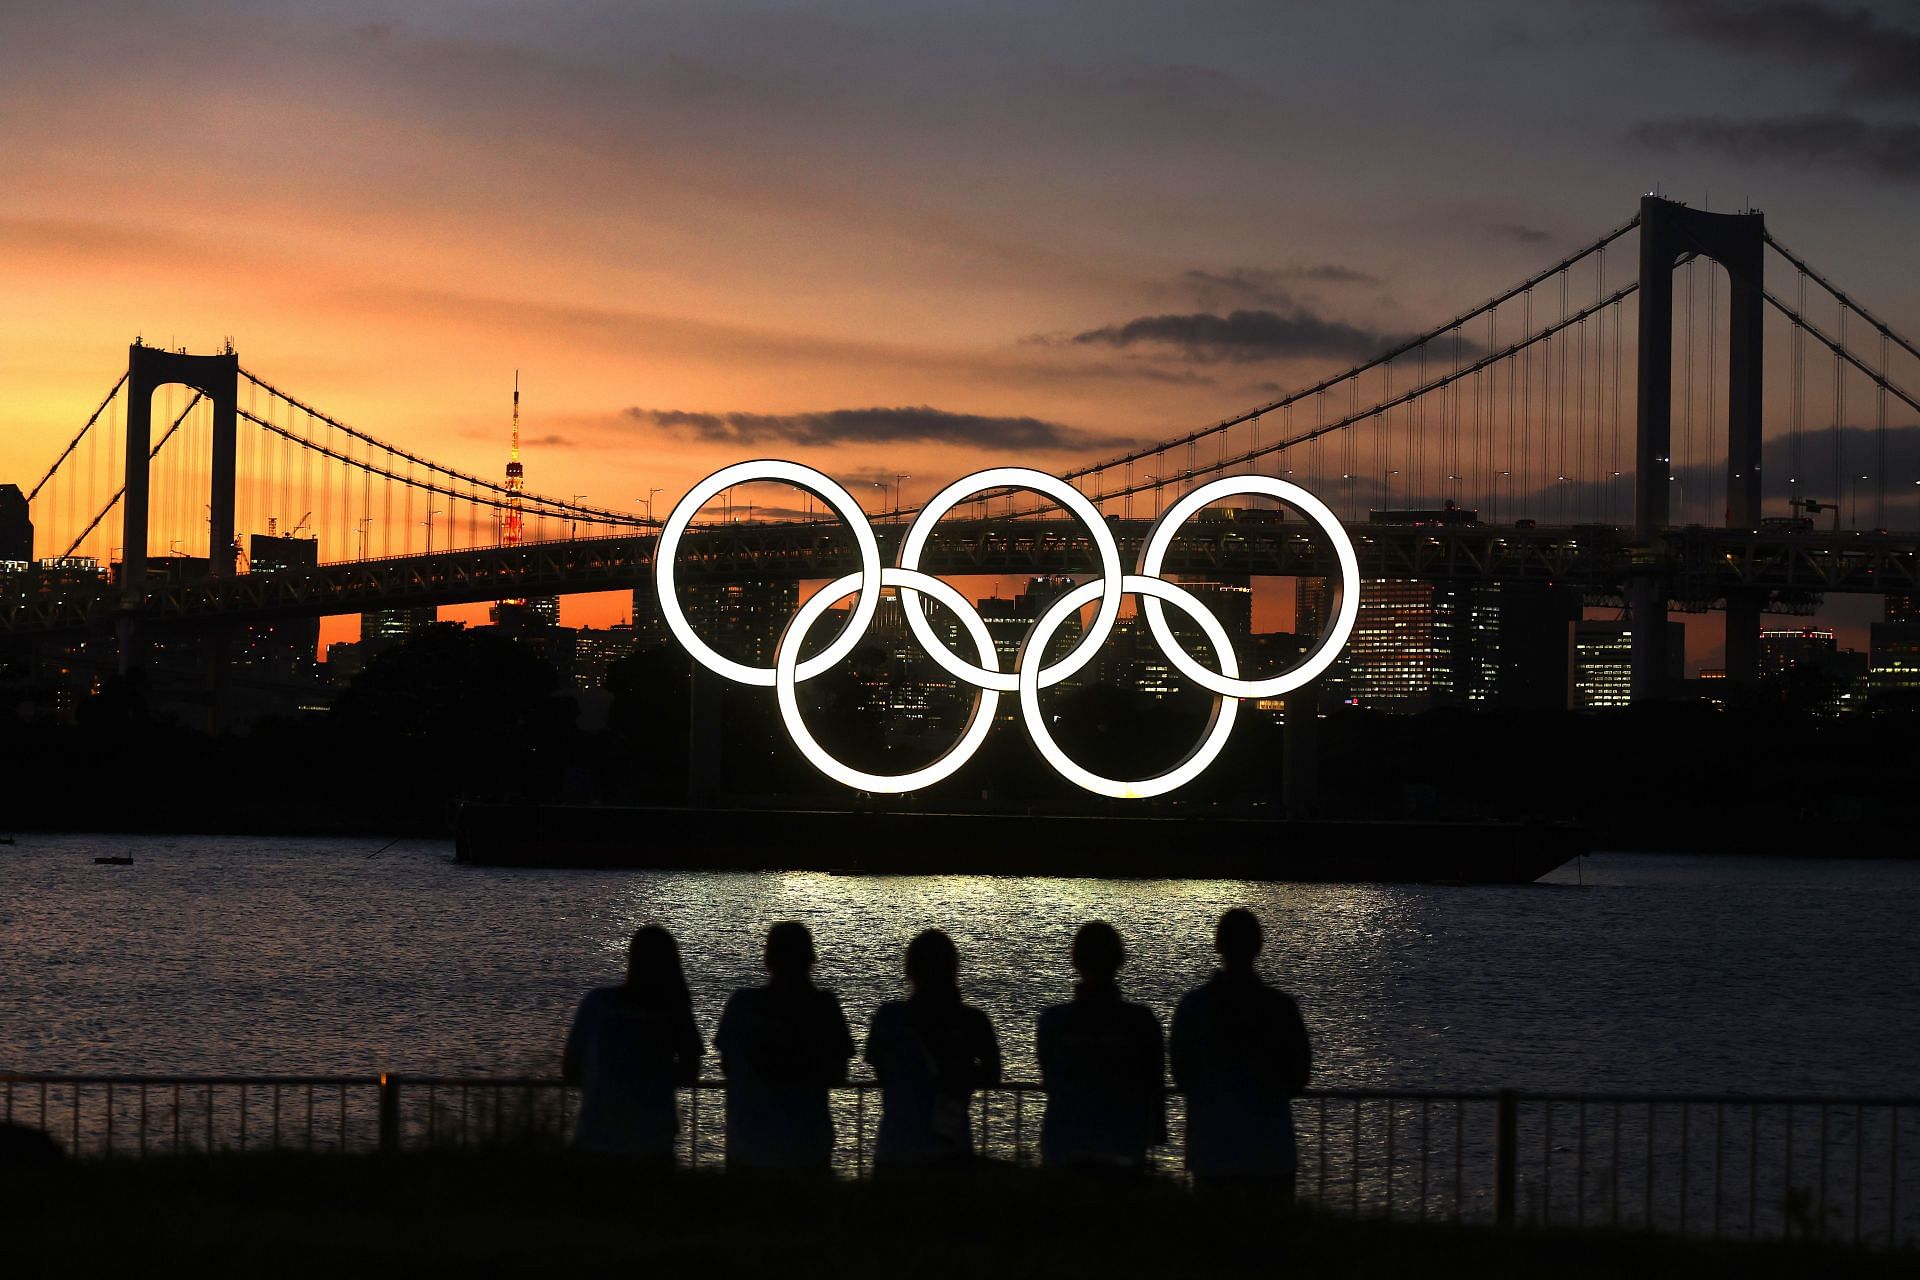 The Olympic rings on the Rainbow Bridge in Tokyo. (PC: Getty Images)